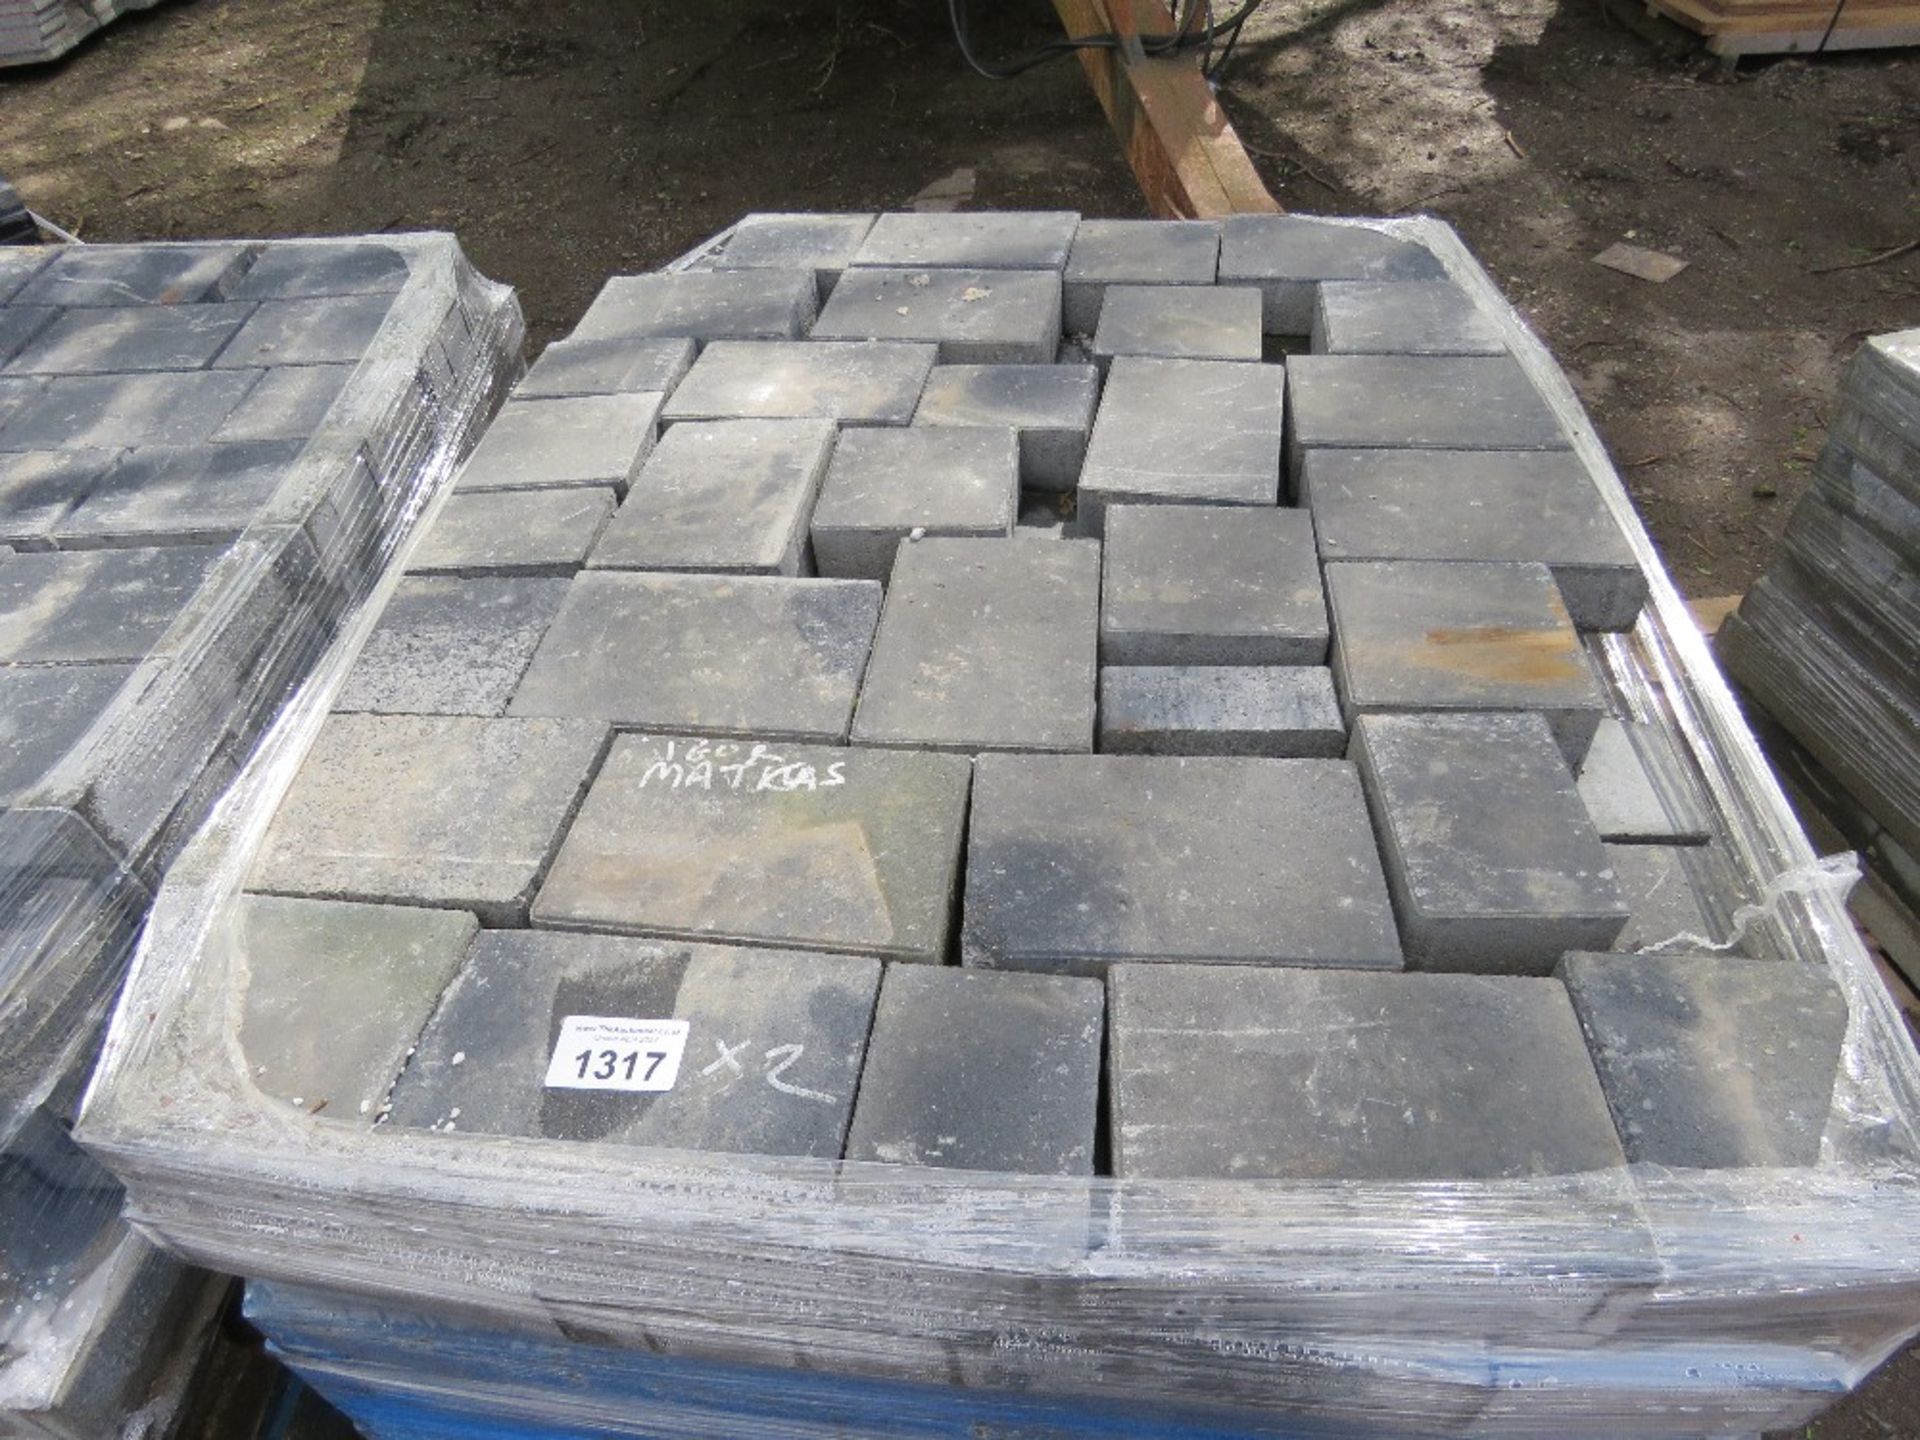 2 X PALLETS OF BLOCK PAVERS, BLACK COLOURED. - Image 2 of 7